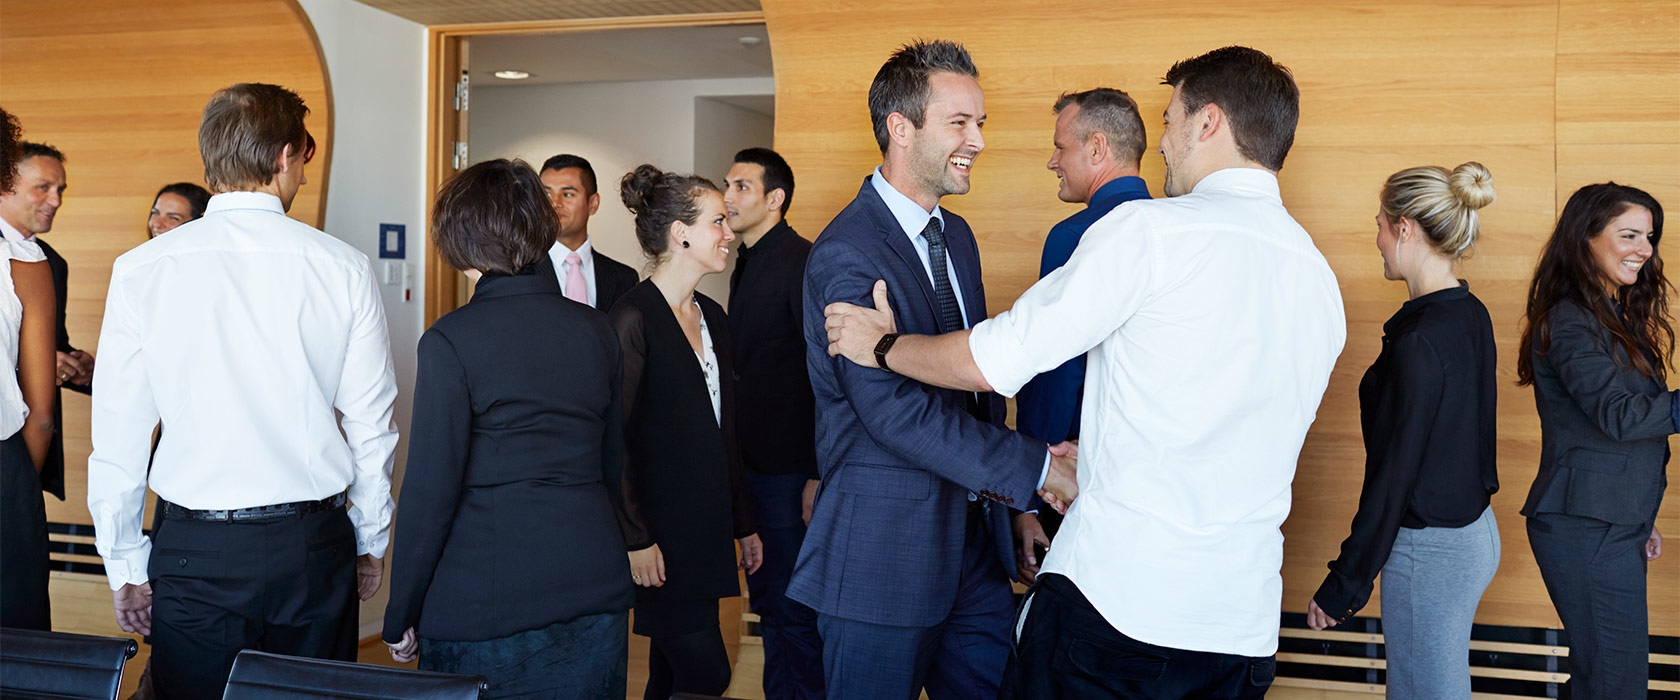 A group of employees shaking hands and welcoming each other